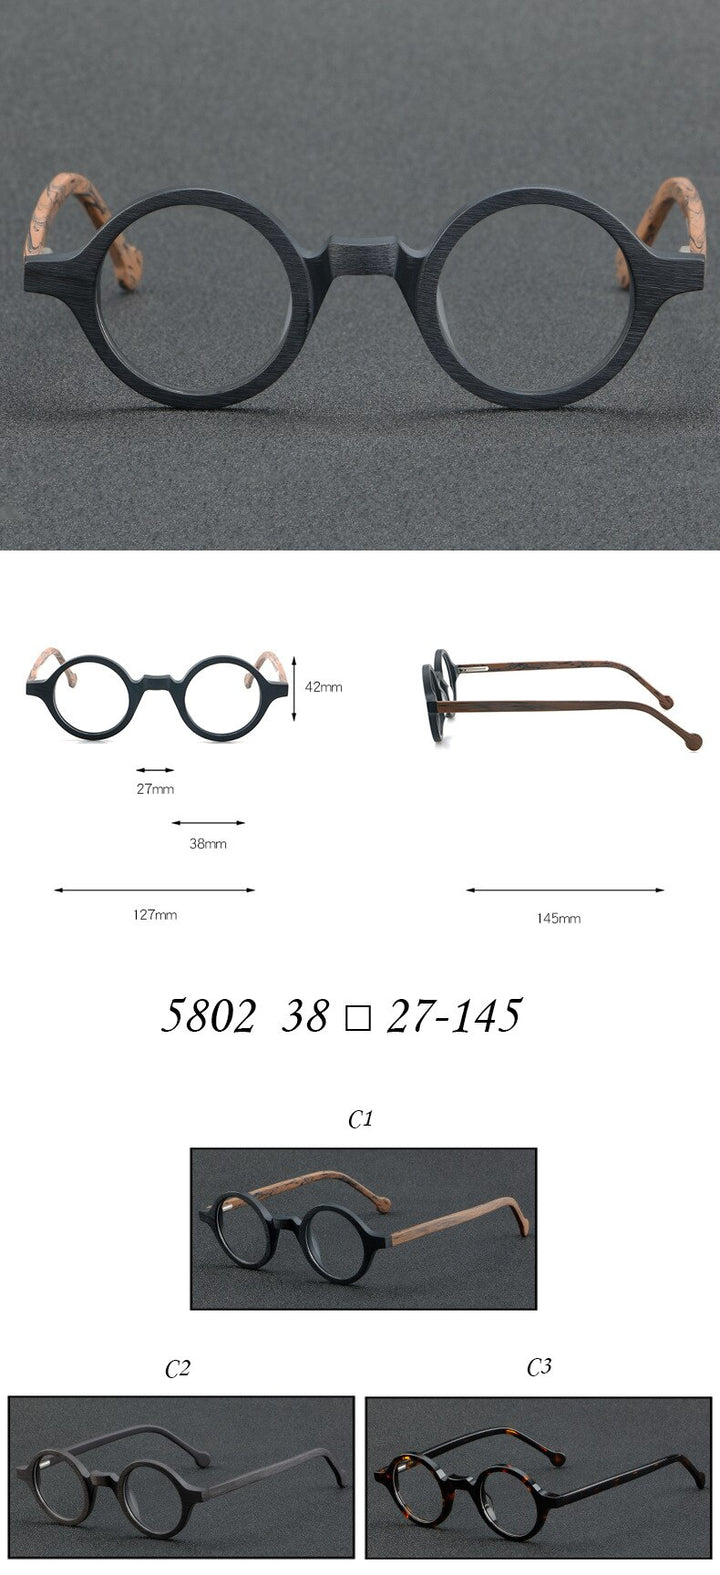 Cubojue Unisex Full Rim Small Round Acetate Hyperopic Reading Glasses Cl003a Reading Glasses Cubojue   